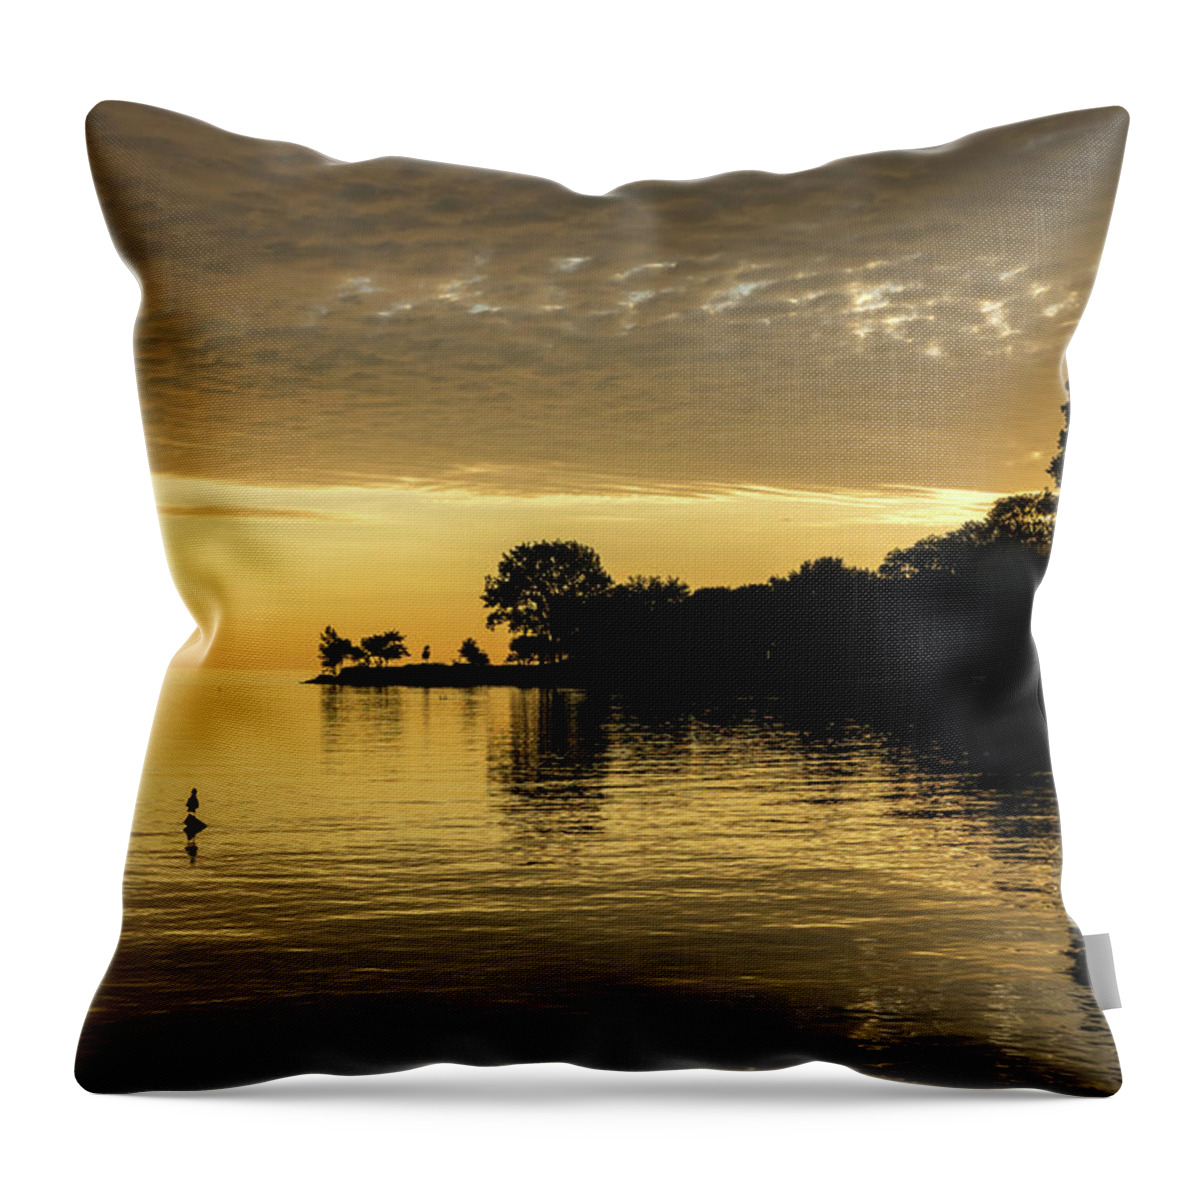 One Seagull Throw Pillow featuring the photograph One Seagull - Lake Ontario Sunrise in Lustrous Gold by Georgia Mizuleva